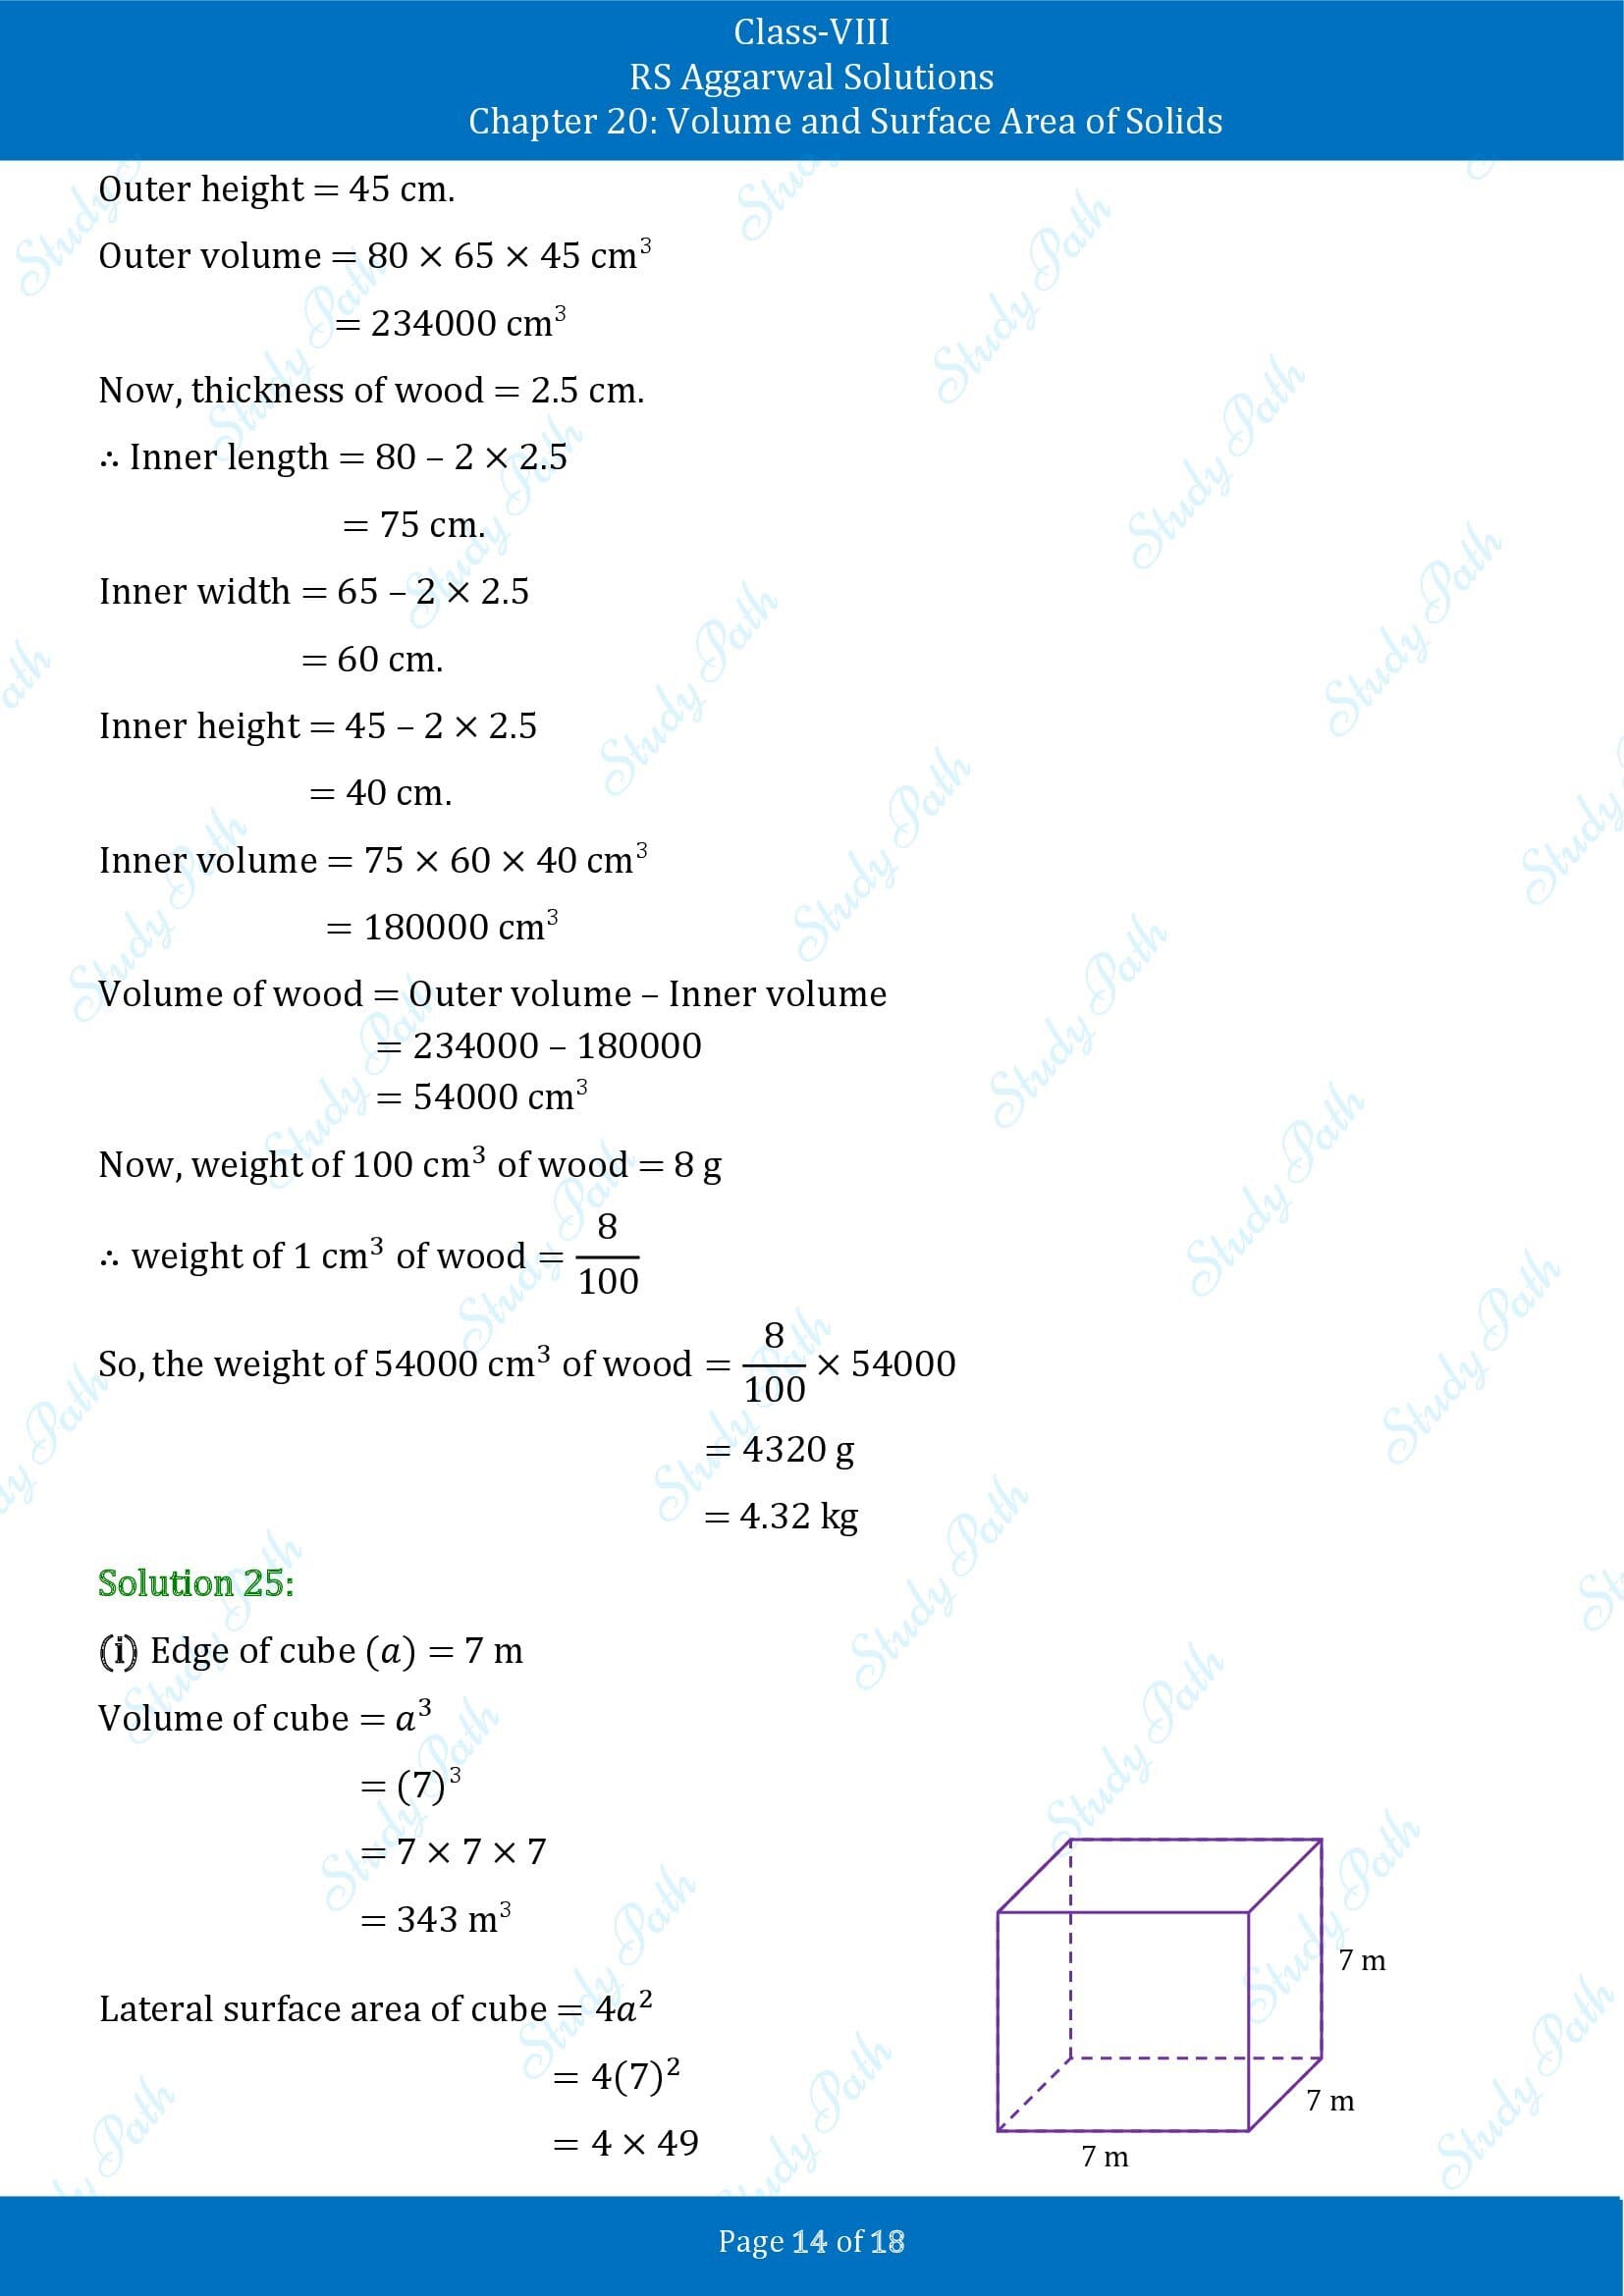 RS Aggarwal Solutions Class 8 Chapter 20 Volume and Surface Area of Solids Exercise 20A 00014